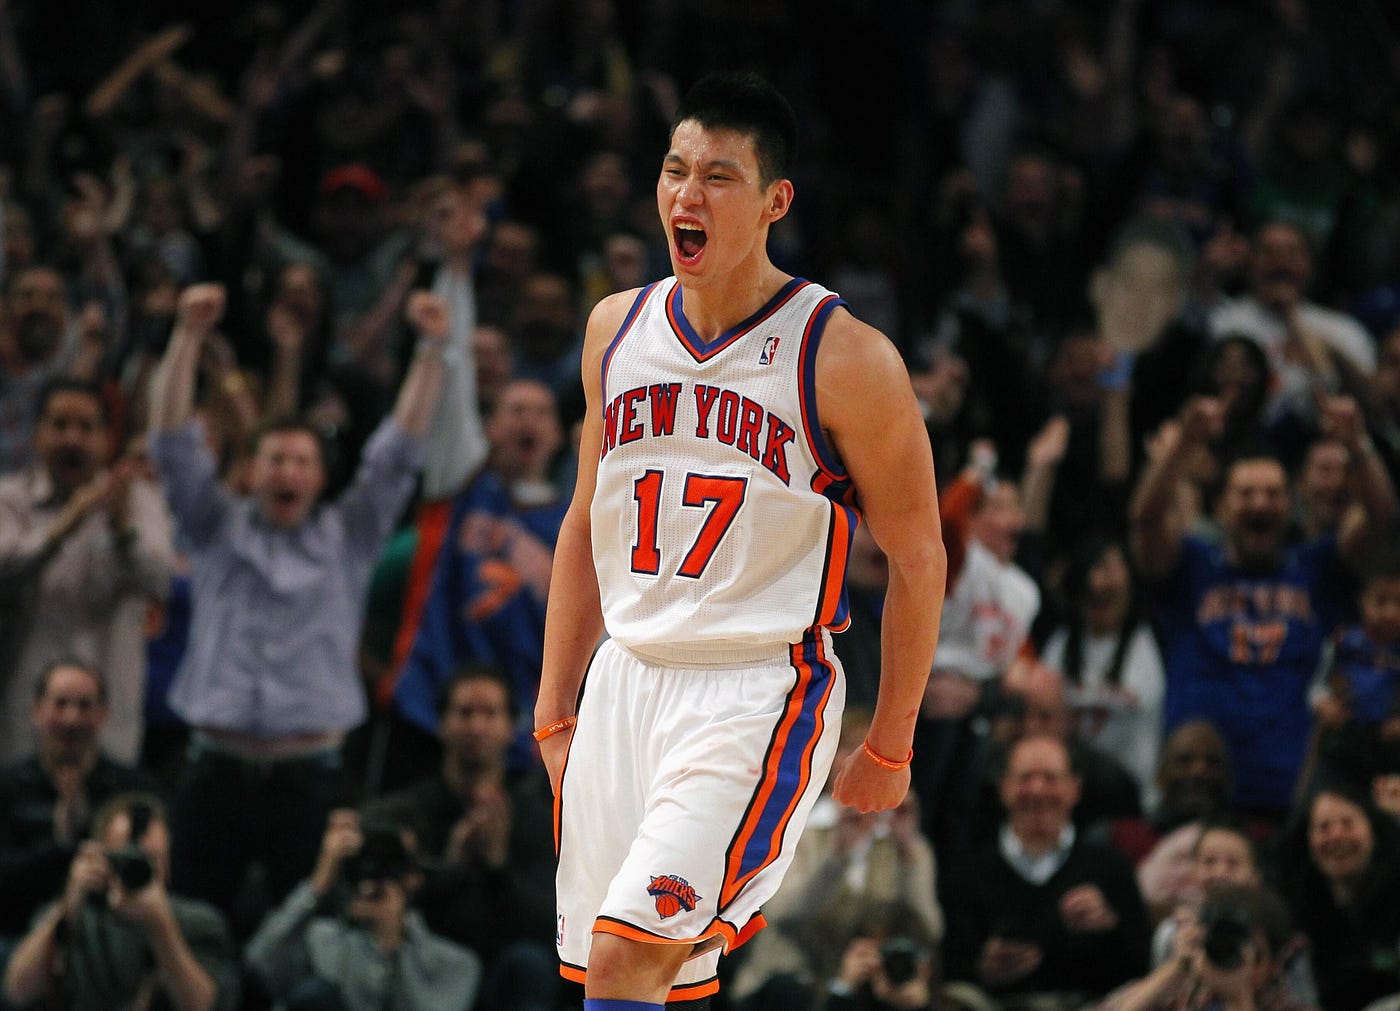 The Lin-sanity continues: Jeremy Lin scores 38, leads Knicks over